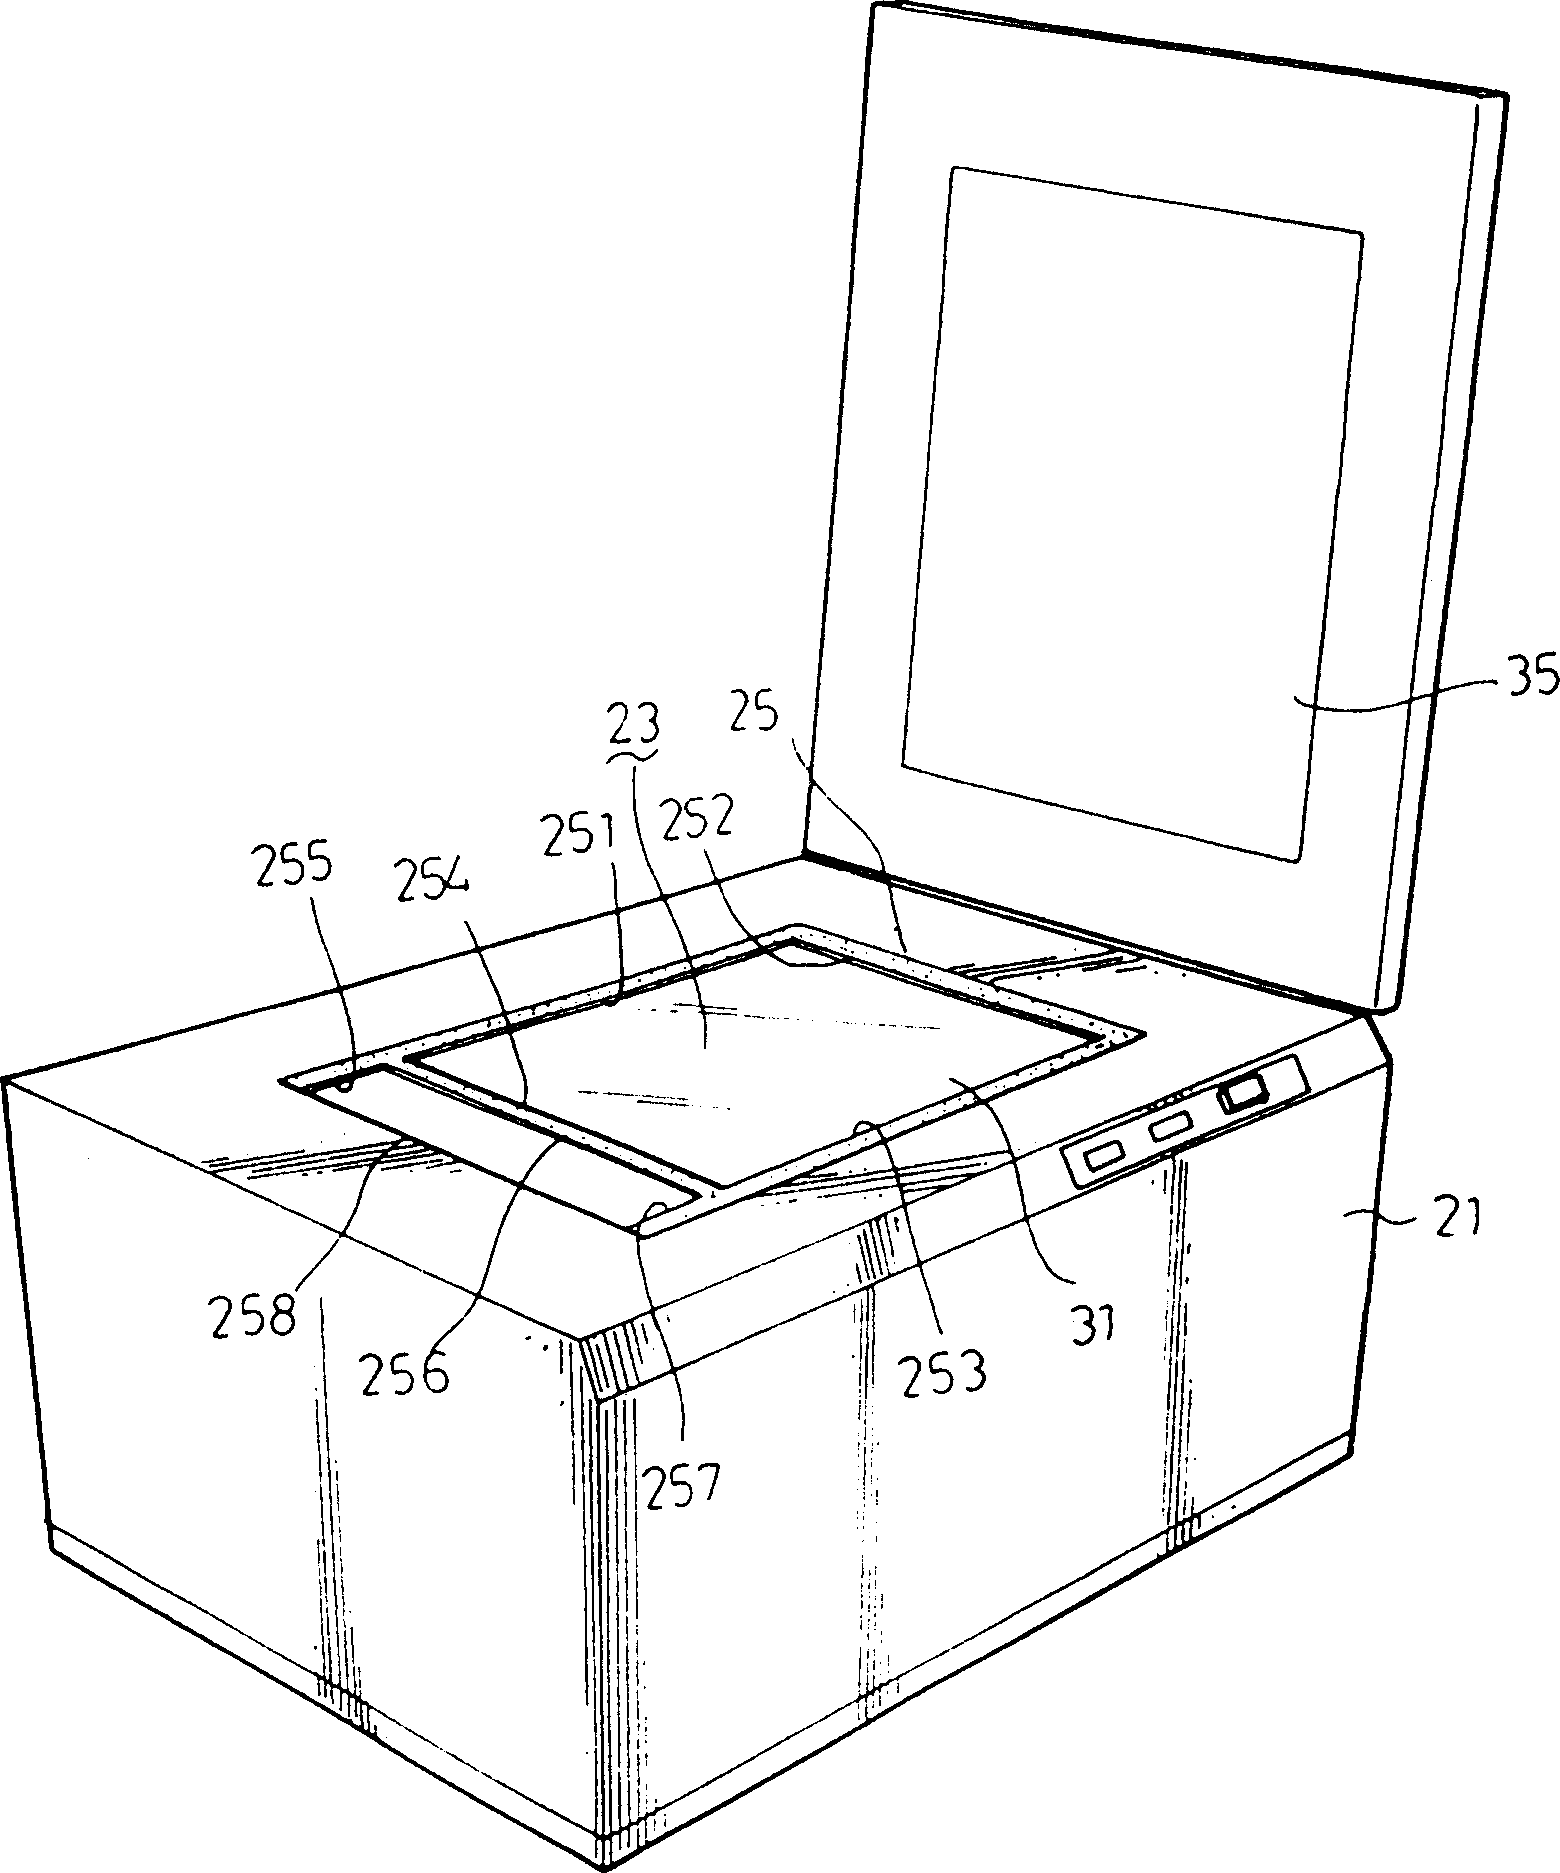 Primary positioning method for penetrating type scanning light source